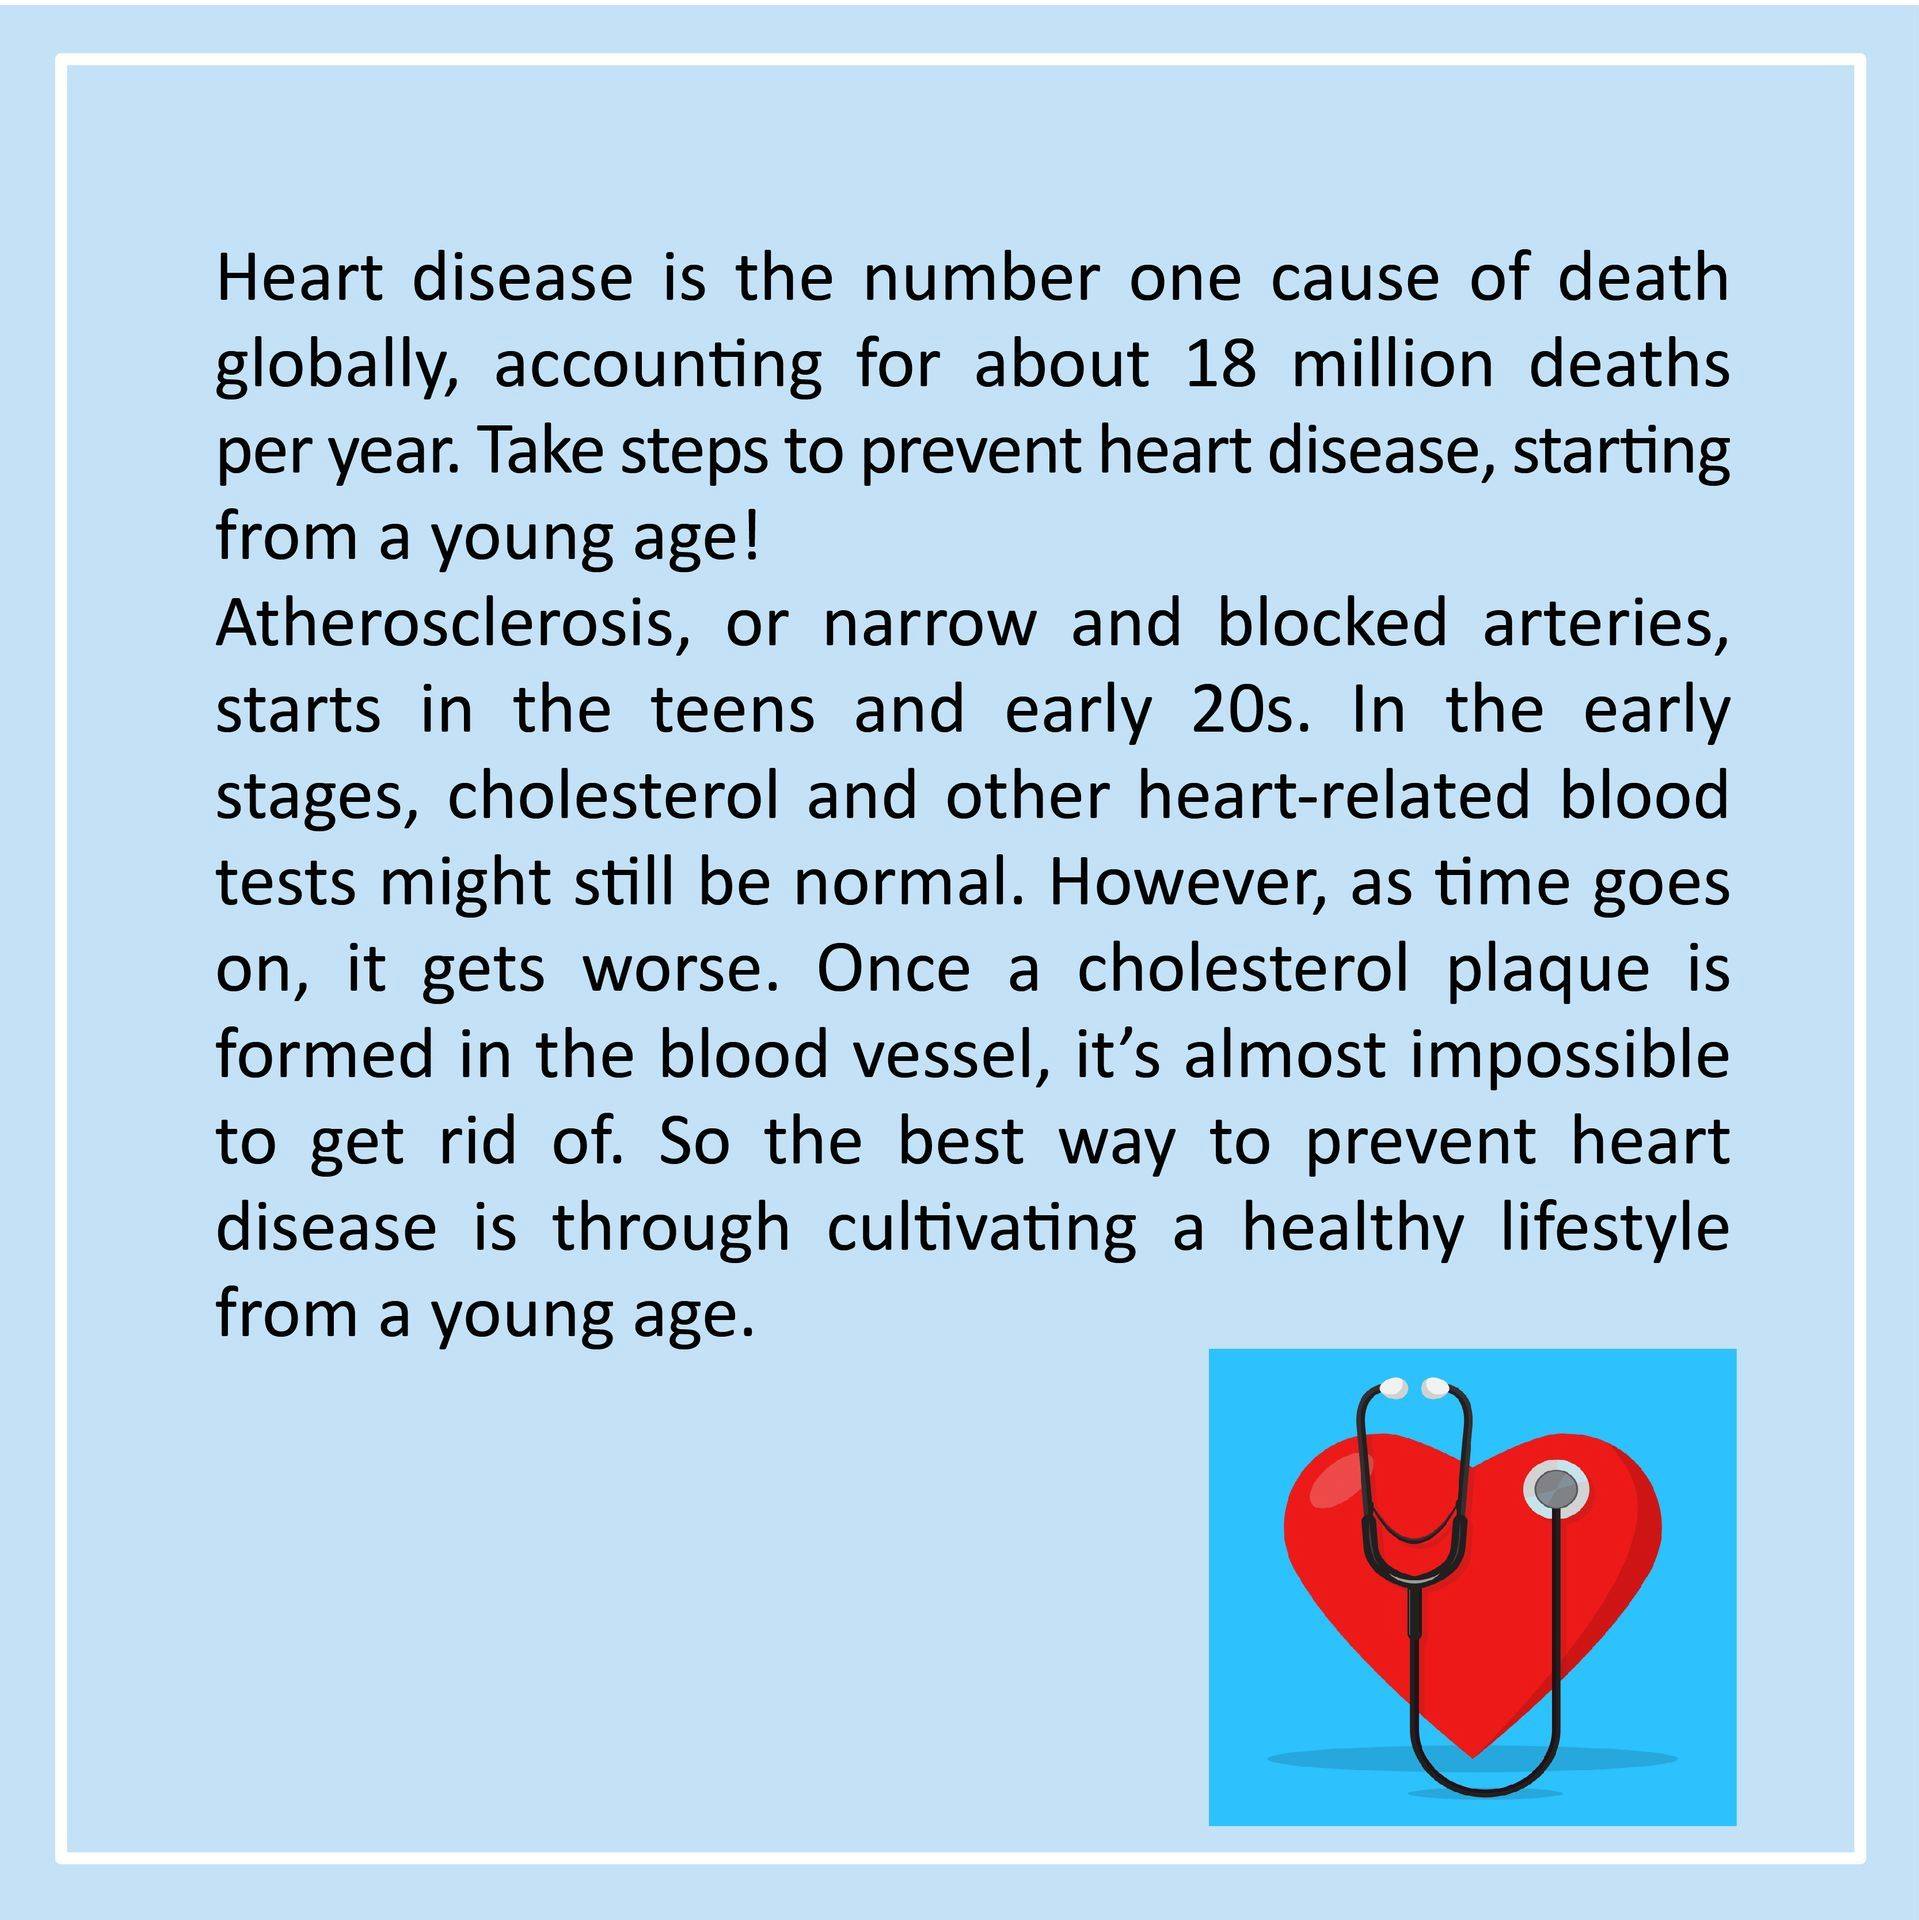 Heart disease is the number one cause of death globally